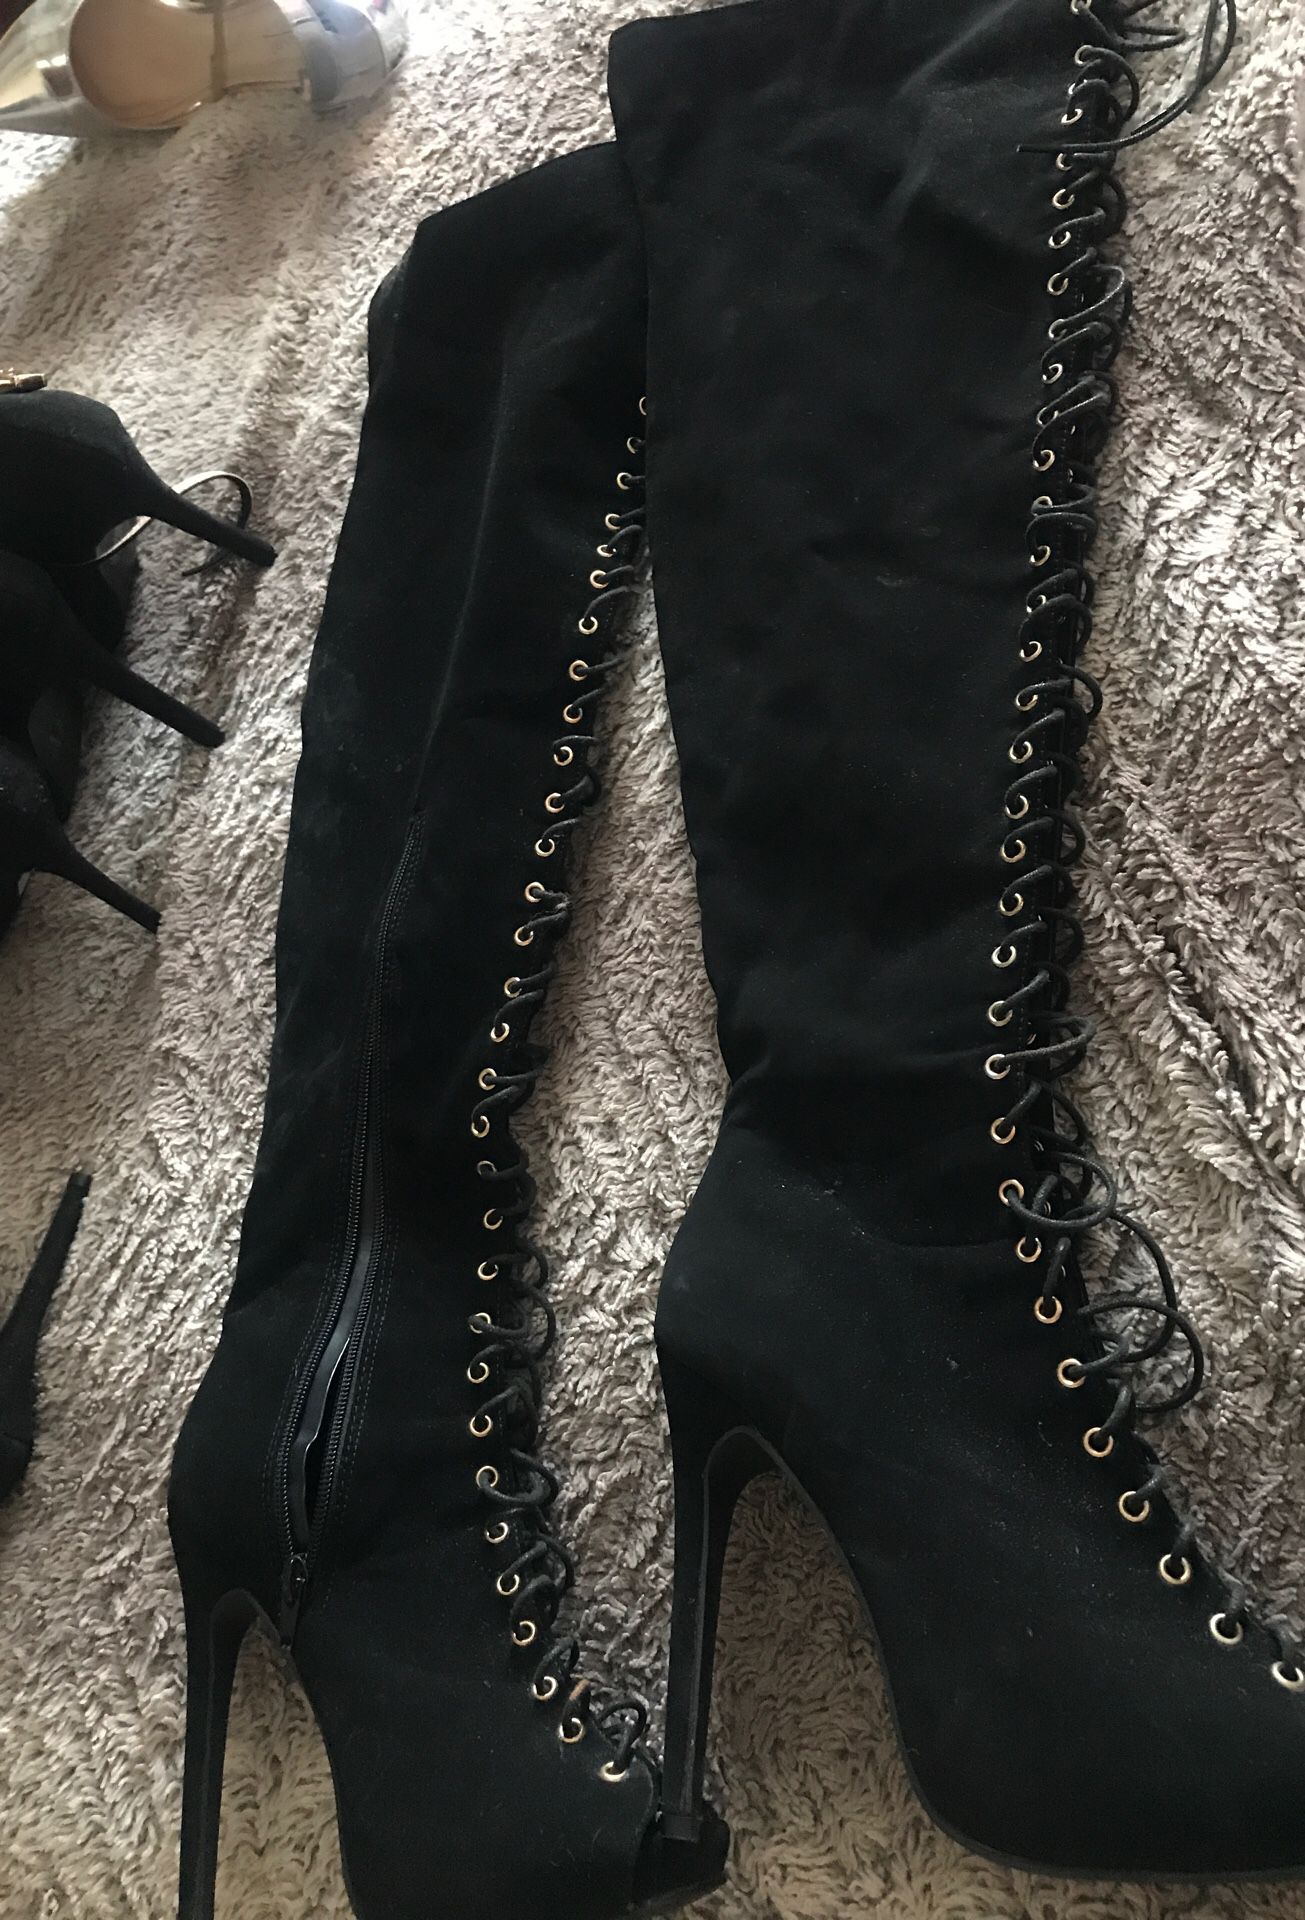 Thigh high black suede boots Super Bowl it’s laced up size a brand new open box never worn